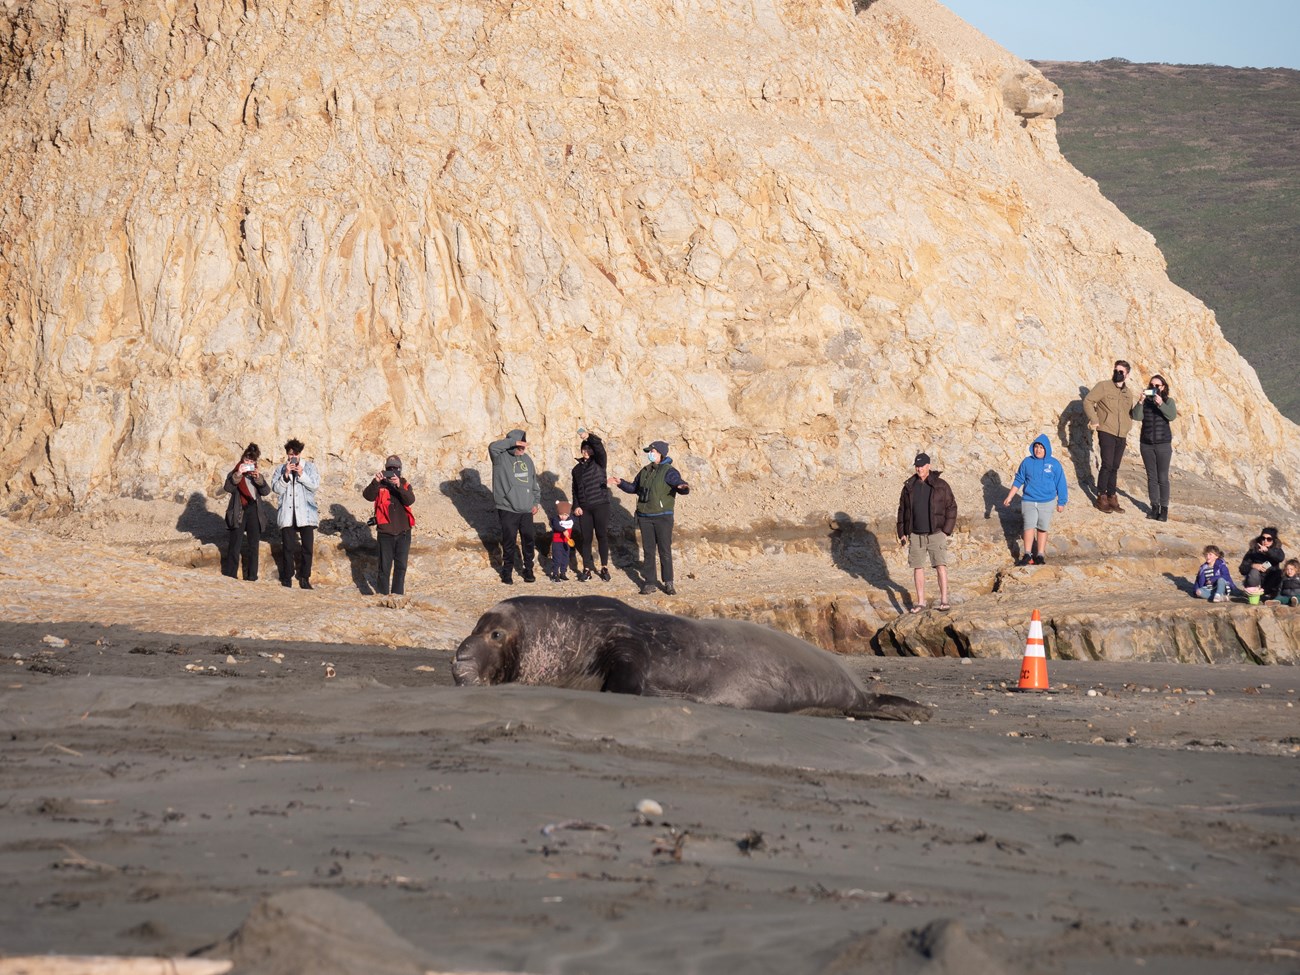 Fourteen people at the base of a beige-colored bluff watch a male elephant seal on a sandy beach.